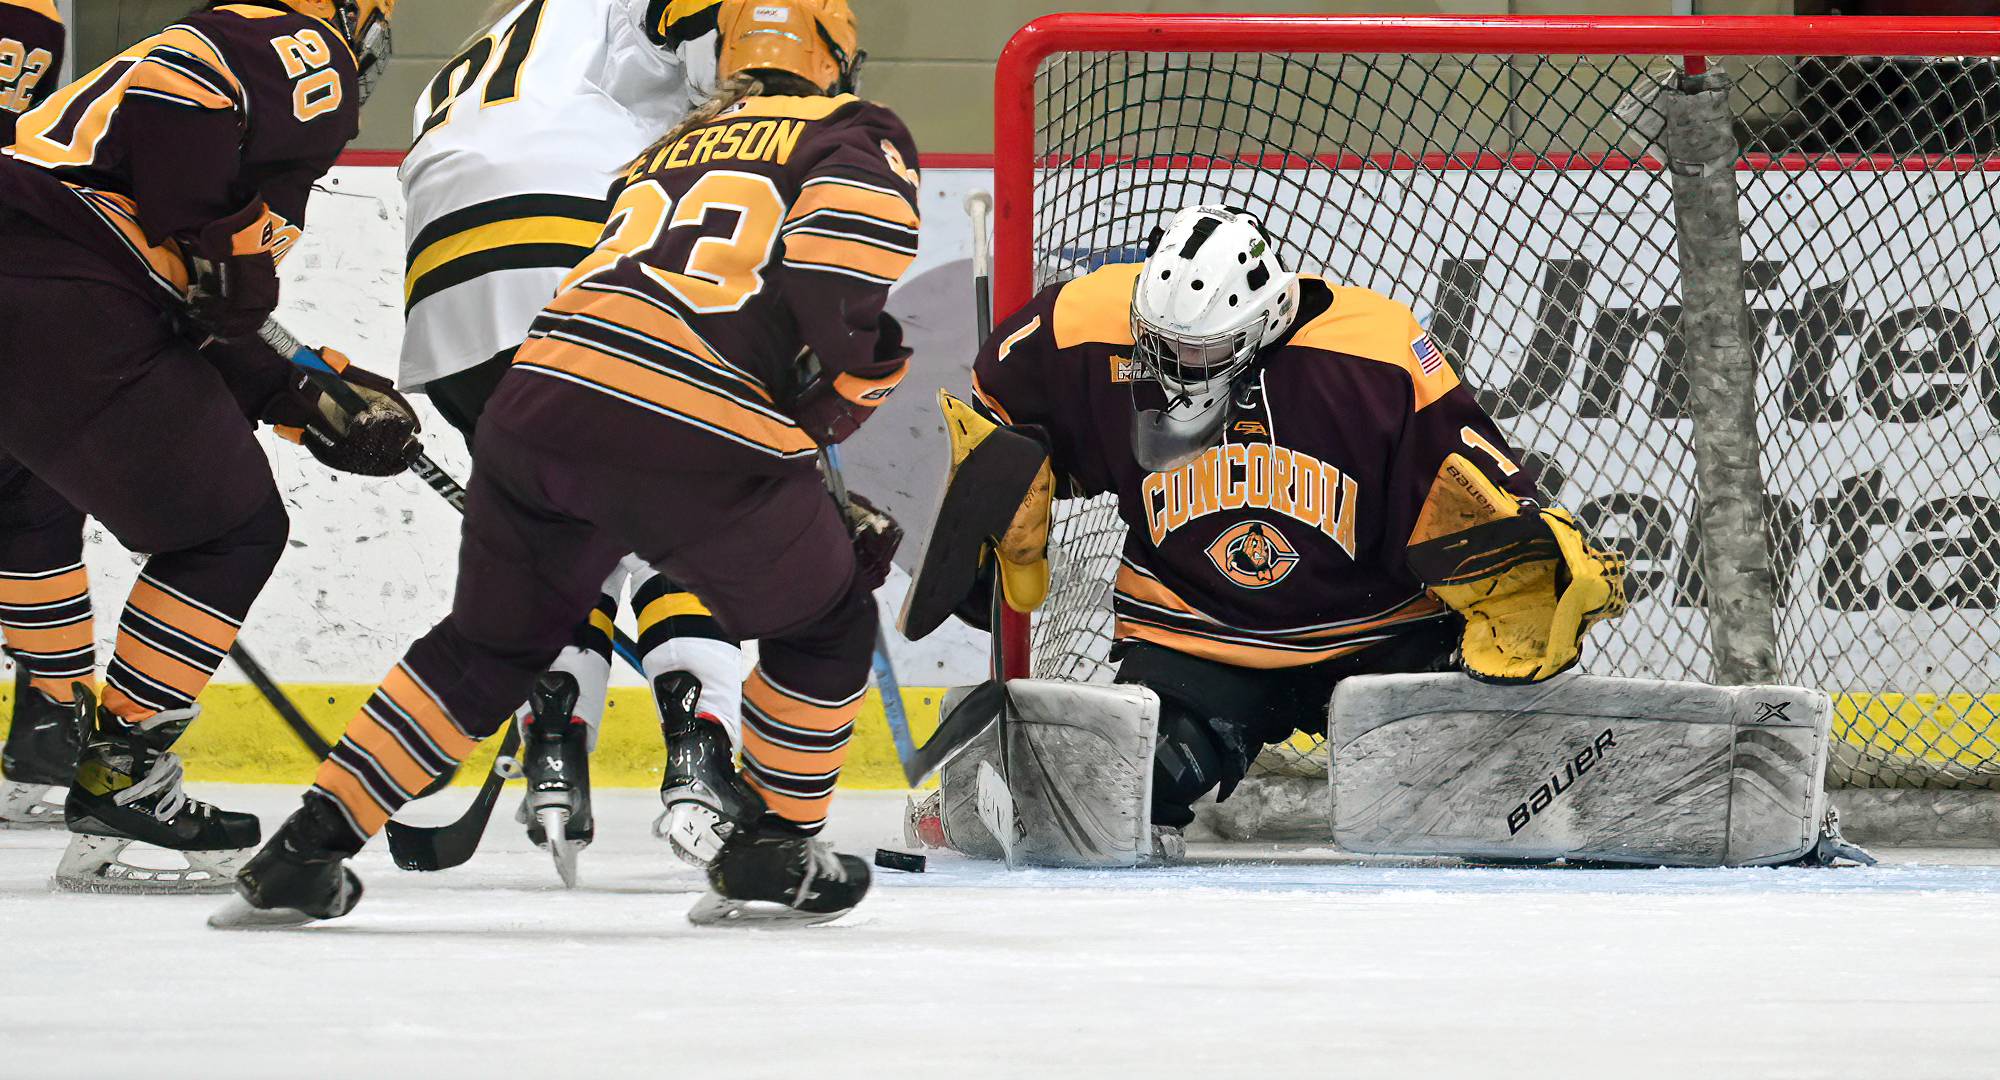 Sophomore goalie Hailee Bailey makes one of her 24 saves in the Cobbers' new uniforms during the team's 7-3 win over UW-Superior